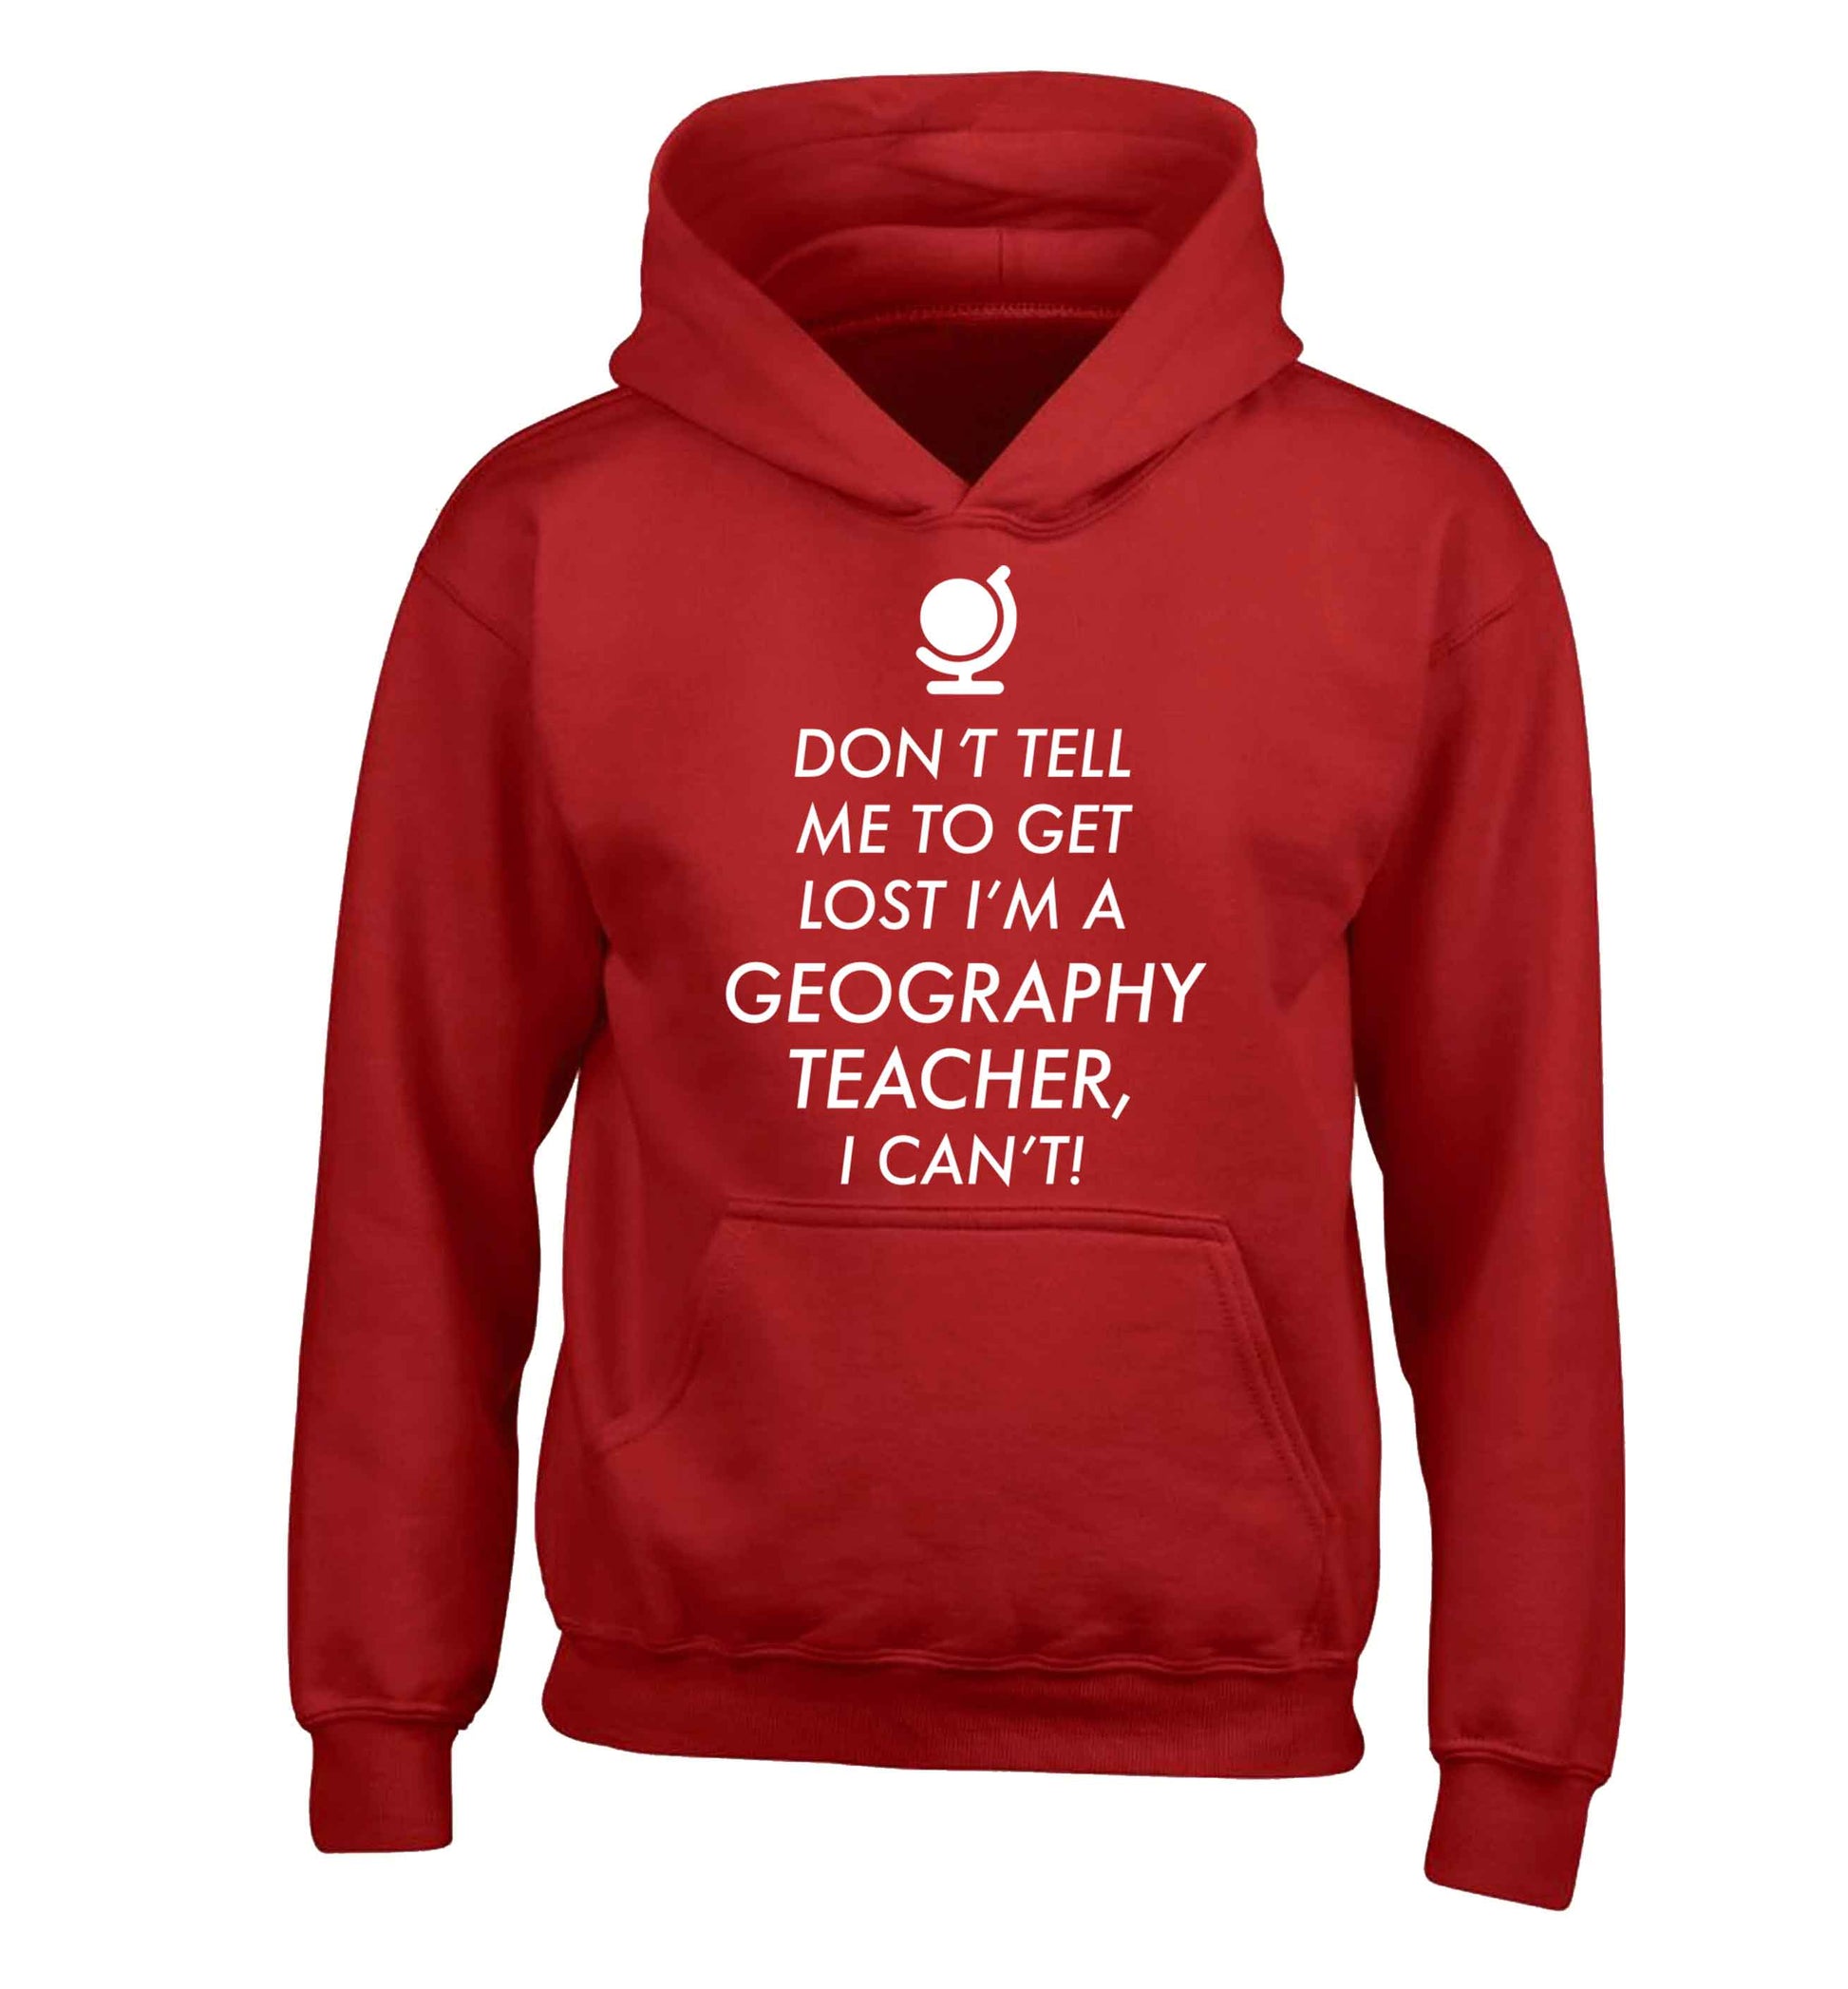 Don't tell me to get lost I'm a geography teacher, I can't children's red hoodie 12-13 Years